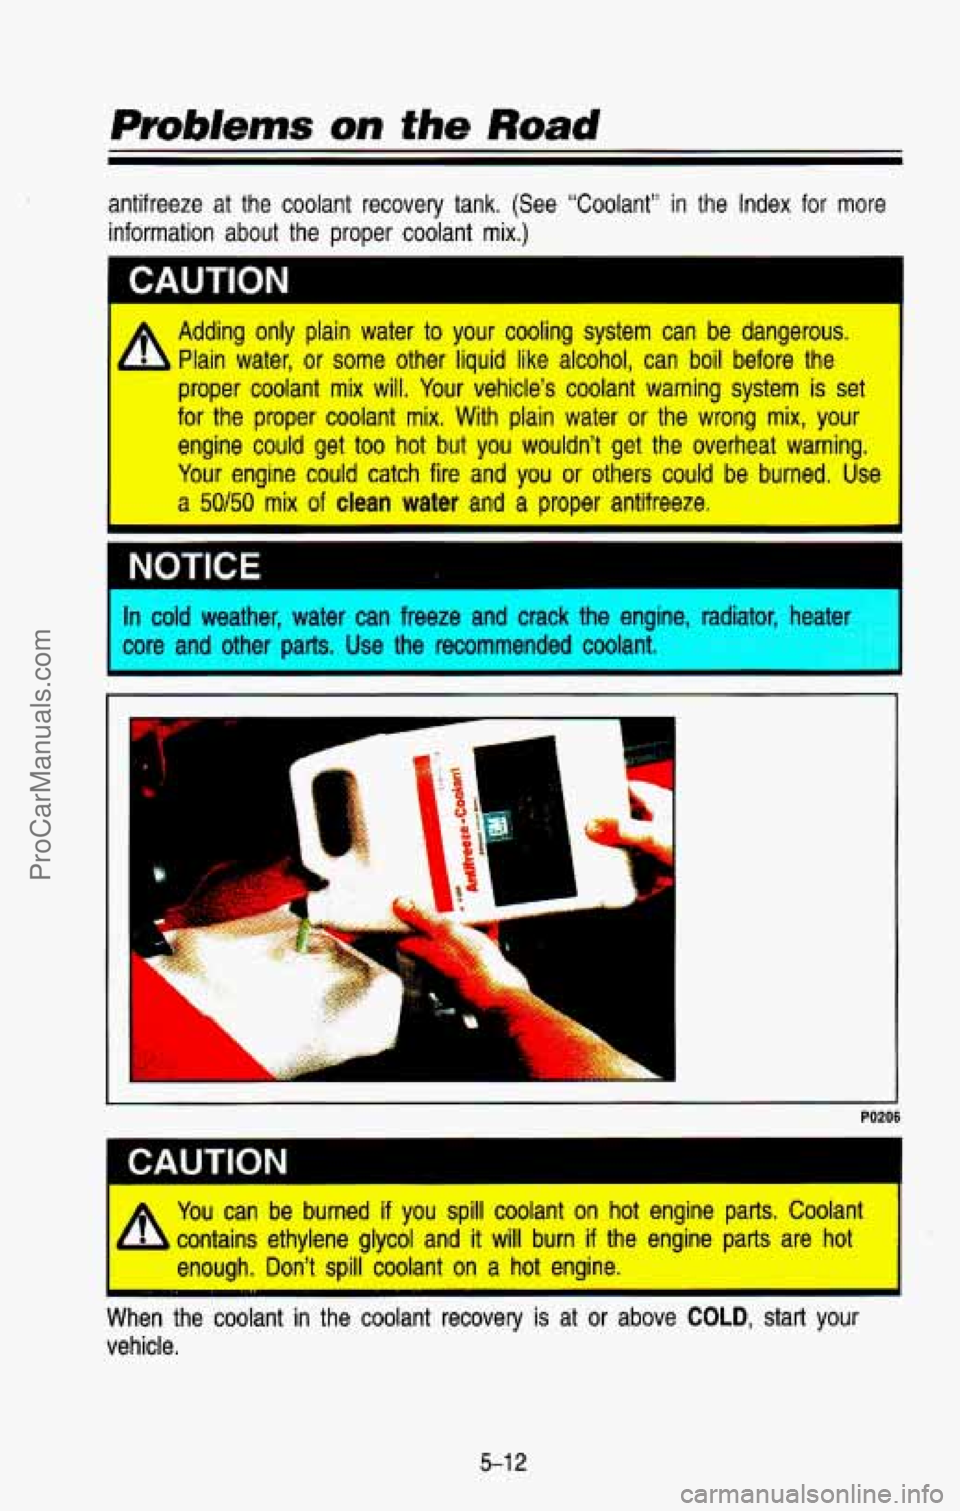 CHEVROLET SUBURBAN 1993  Owners Manual antifreeze  at  the  coolant  recovery  tank.  (See  “Coolant”  i\
n  the  Index  for  more information  about  the  proper  coolant  mix.) 
Adding  only  plain  water  to  your  cooling  system  